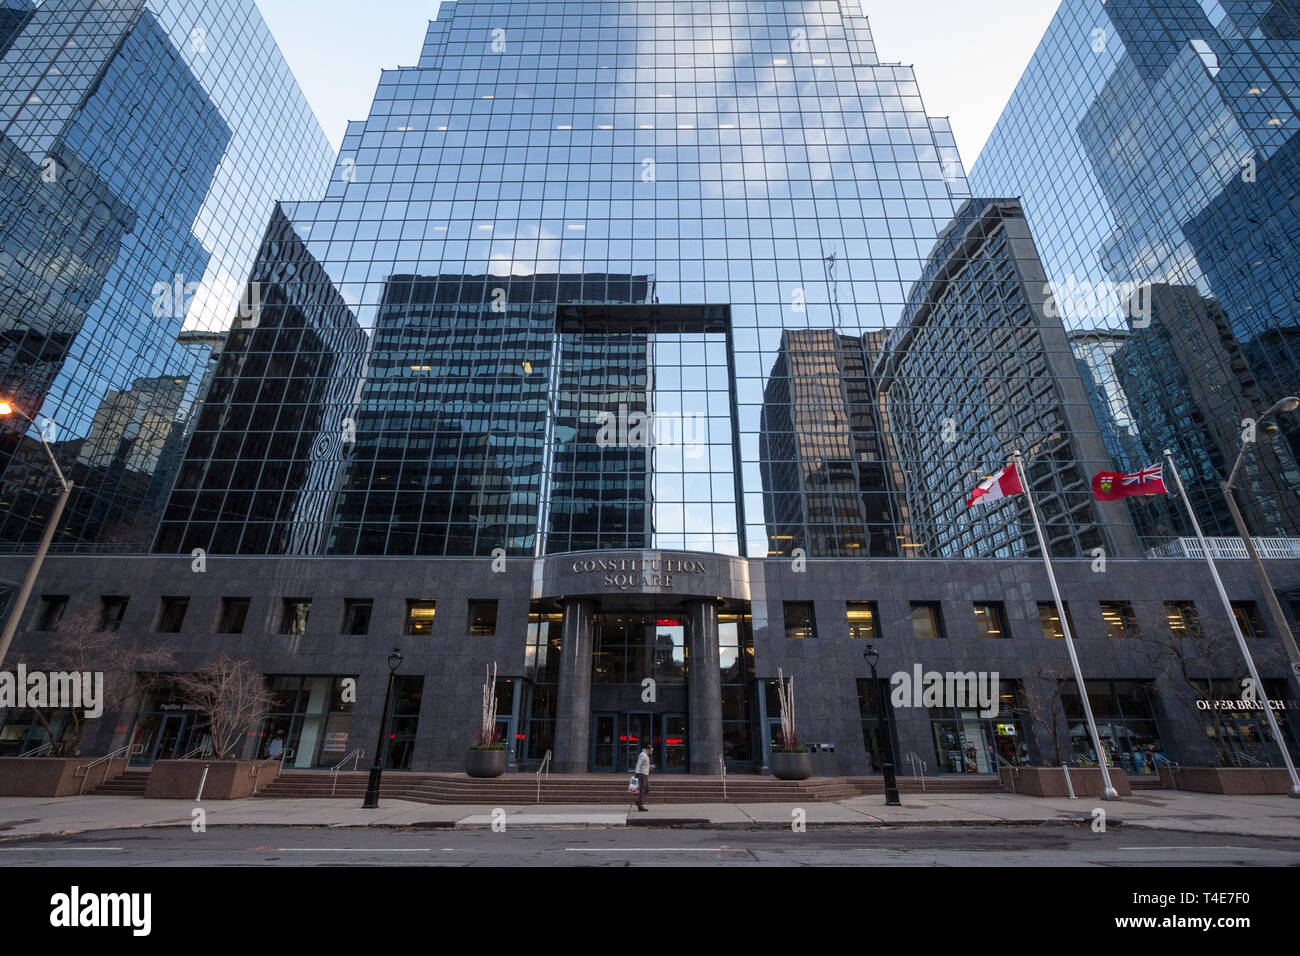 OTTAWA, CANADA - NOVEMBER 10, 2018: Constitution Square entrance in the CBD near buildings of the Ottawa skyline, towers and skyscrapers for Office sp Stock Photo